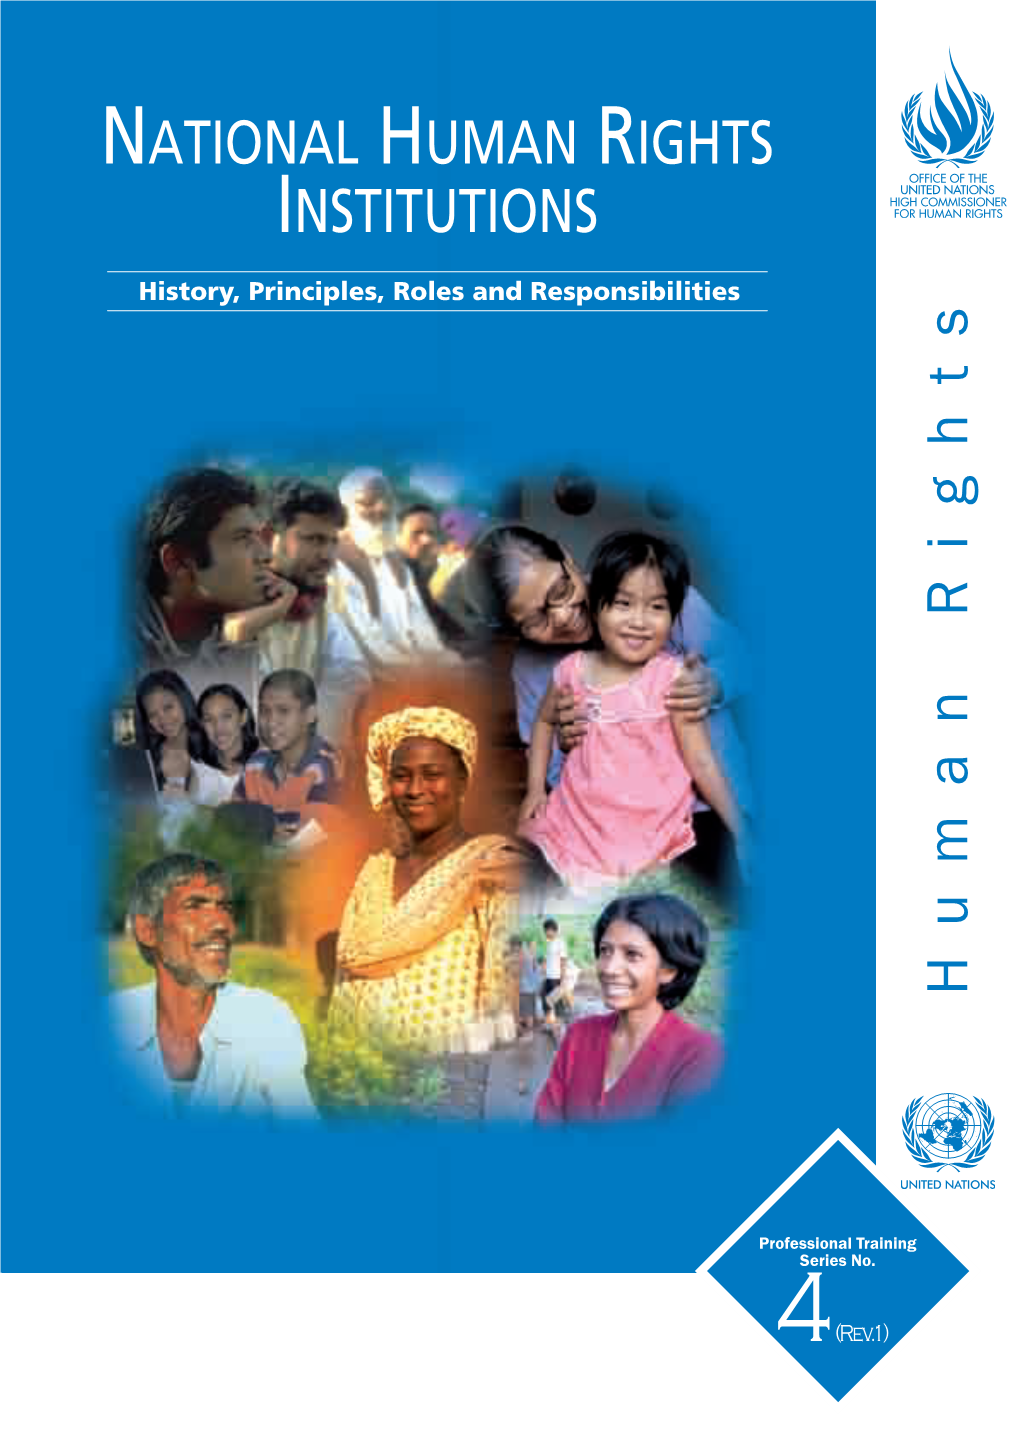 National Human Rights Institutions (Nhris)